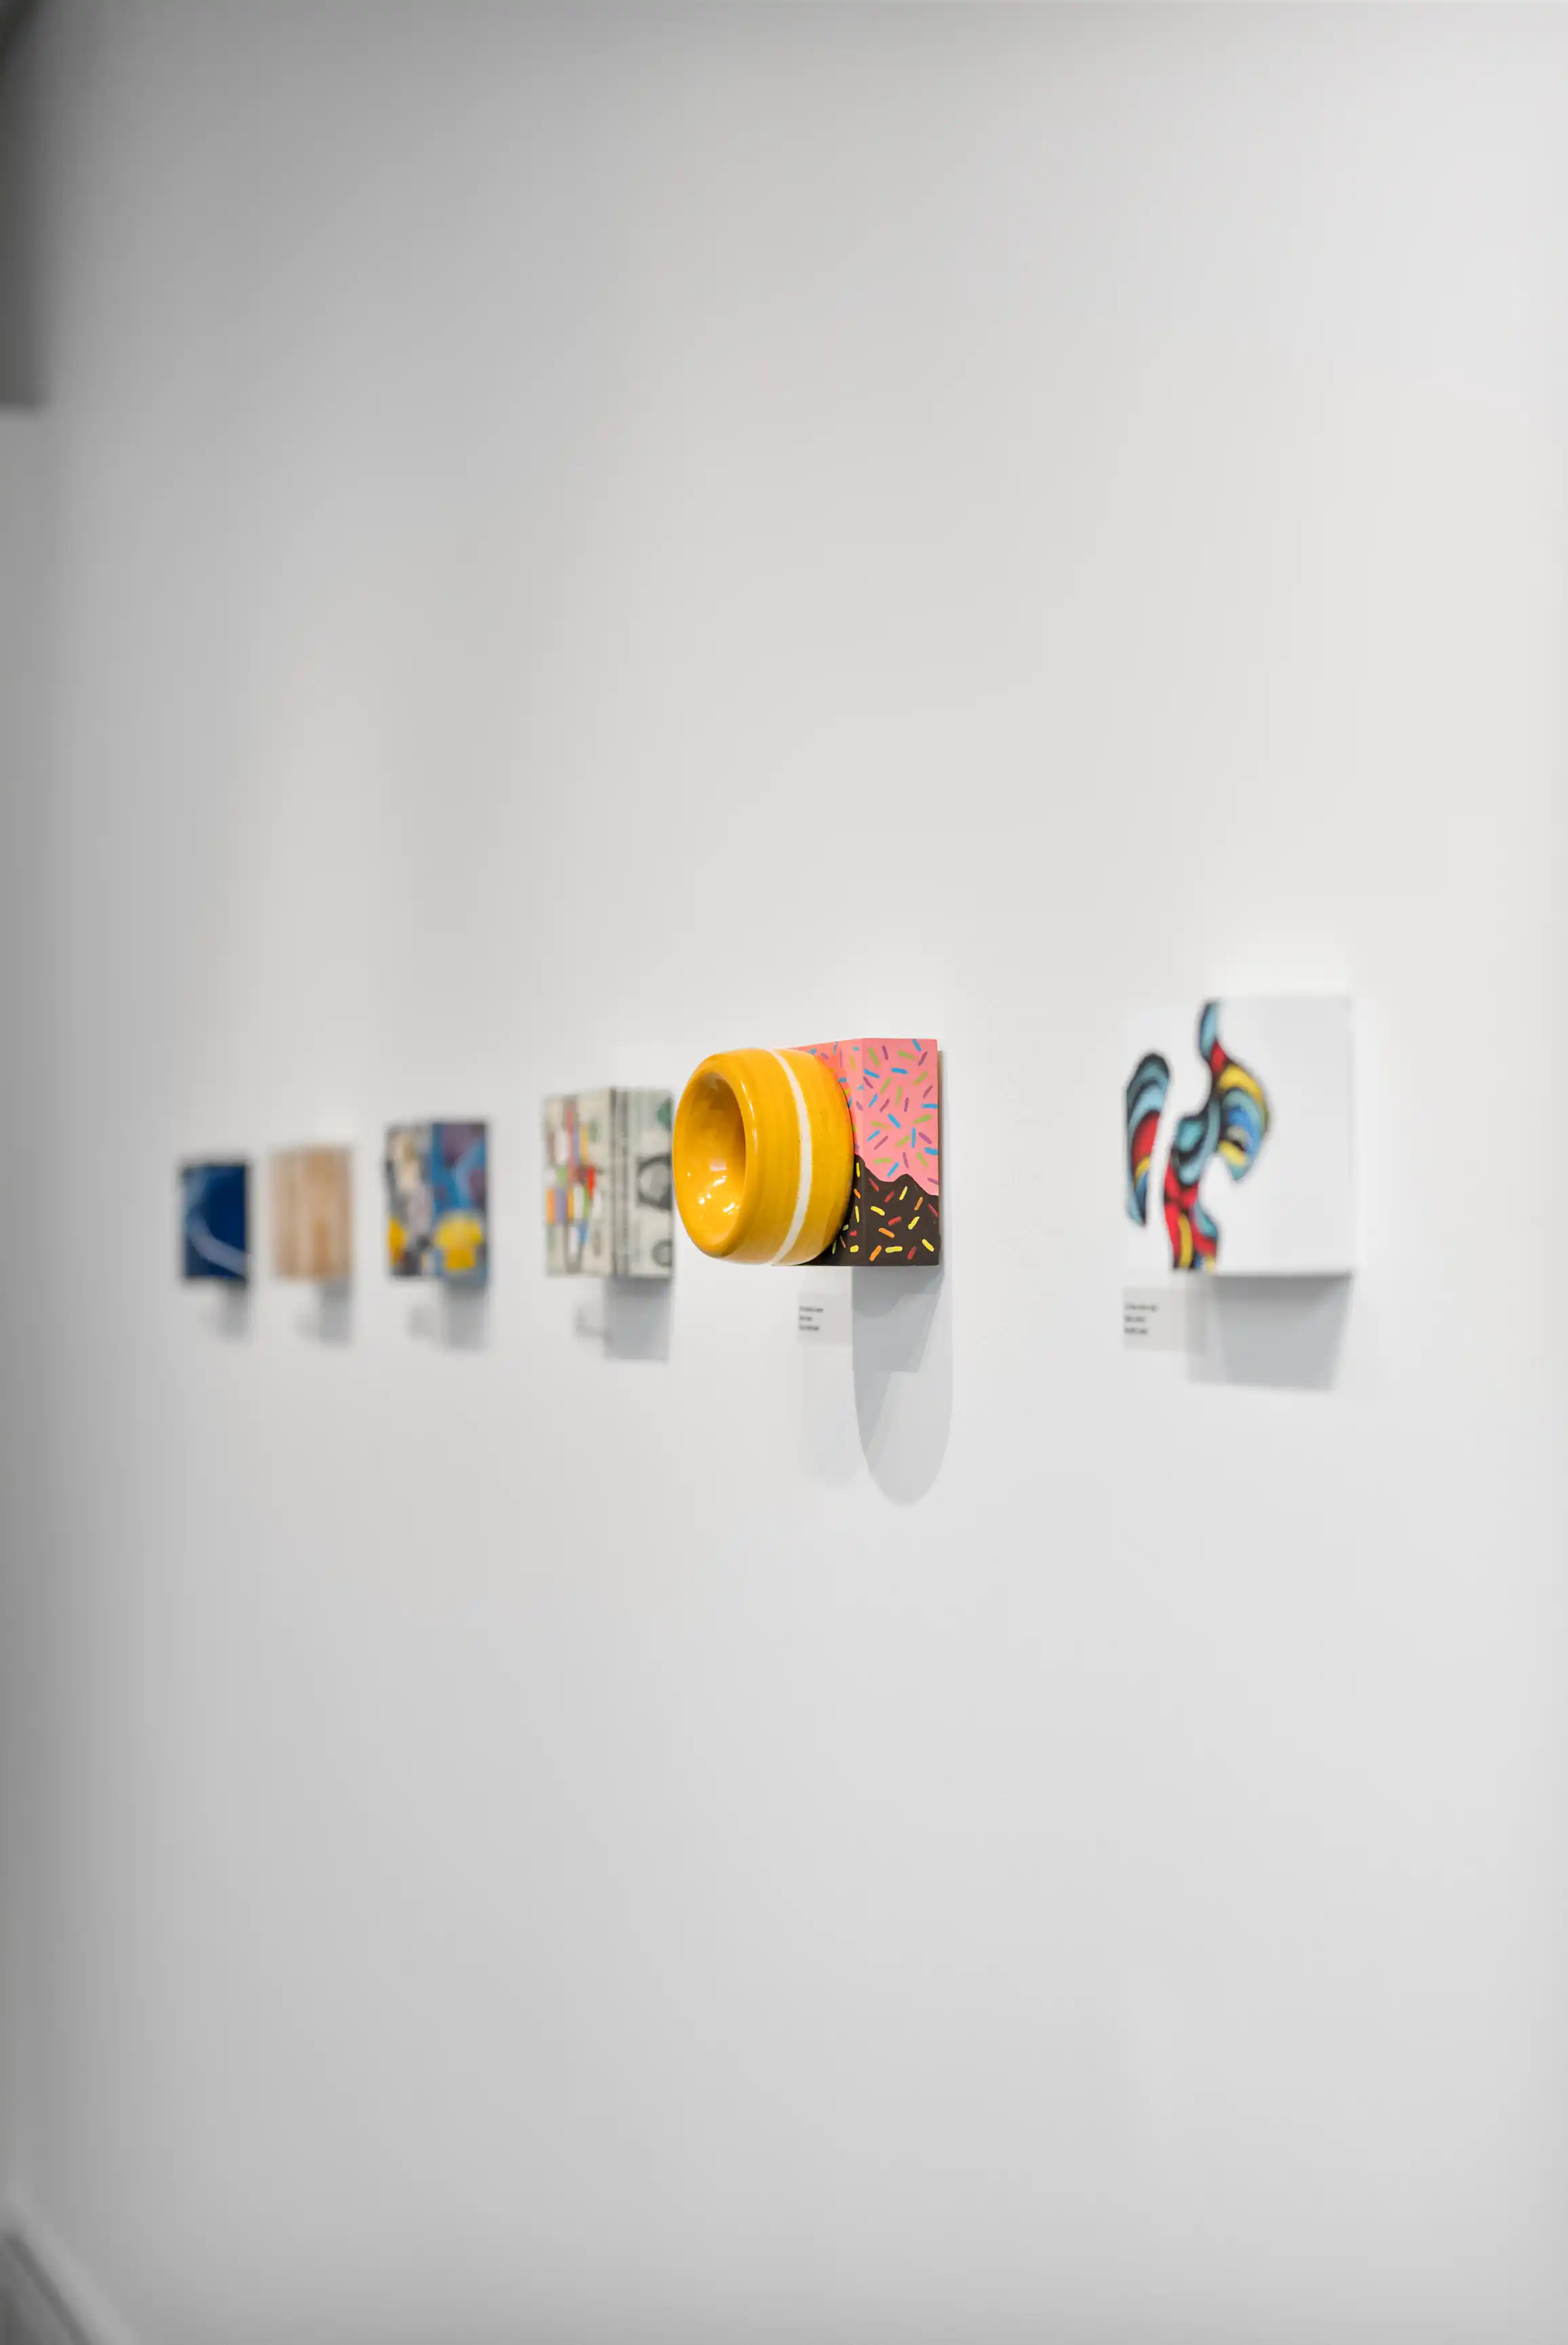 Contemporary art installation featuring a series of colorful abstract paintings and a yellow ceramic bowl displayed on white shelves against a white wall.